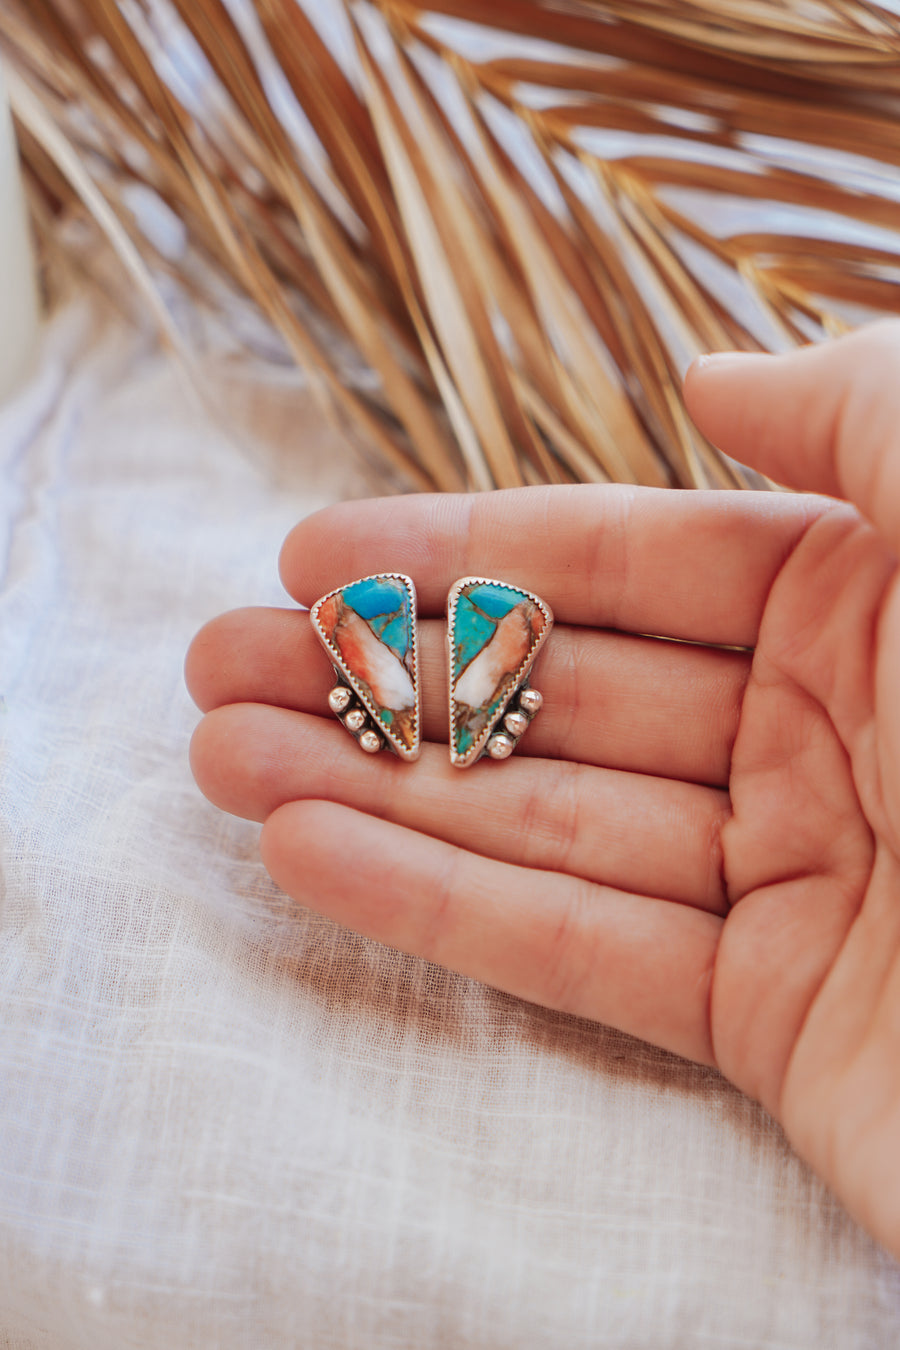 Lacuna Studs in Spiny Oyster with Kingman Turquoise